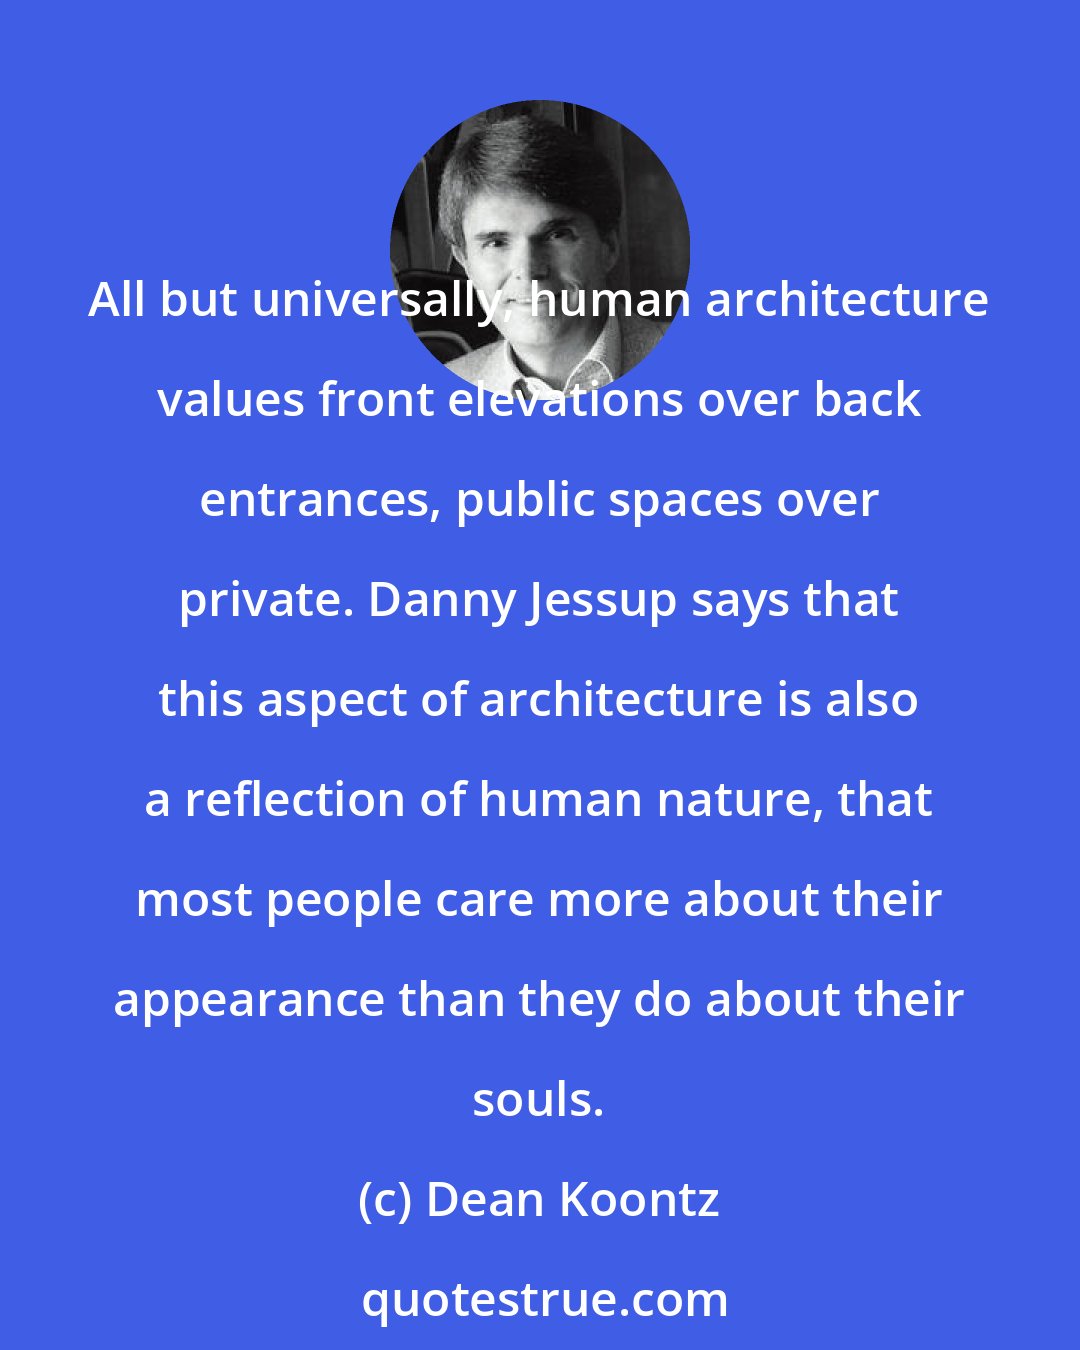 Dean Koontz: All but universally, human architecture values front elevations over back entrances, public spaces over private. Danny Jessup says that this aspect of architecture is also a reflection of human nature, that most people care more about their appearance than they do about their souls.